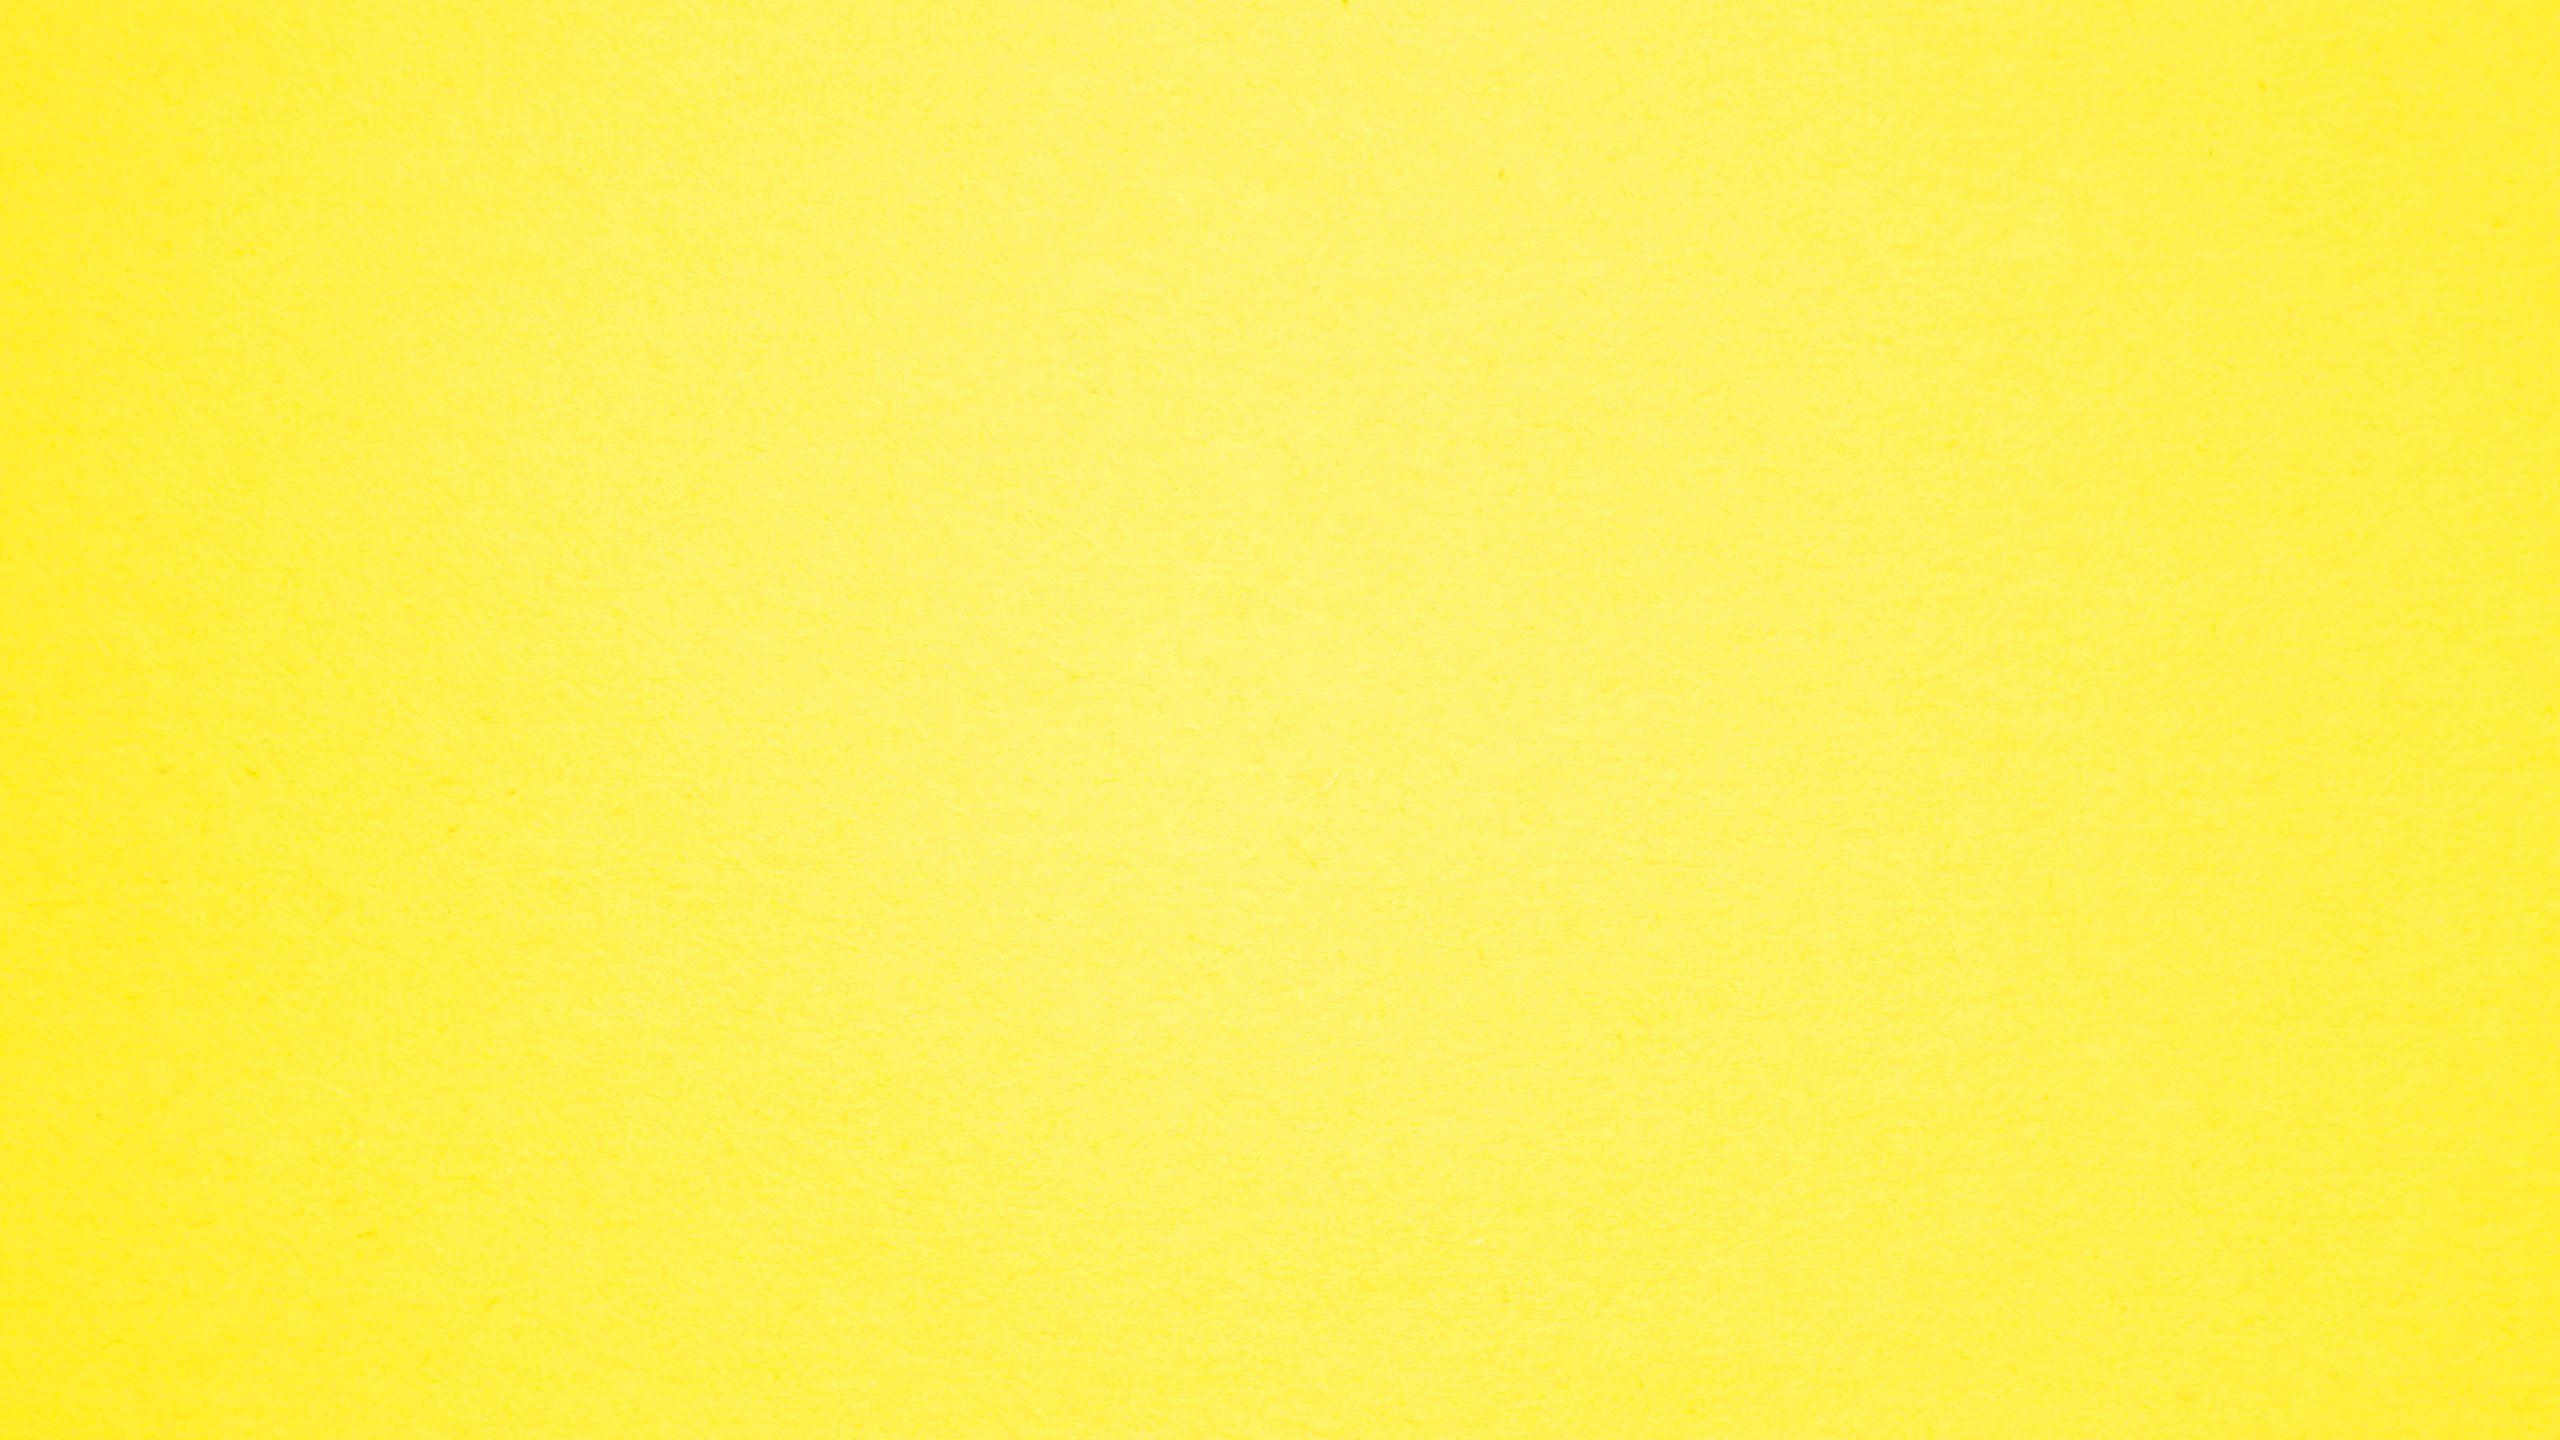 Pastel Wallpaper Plain Yellow : Check out this fantastic collection of